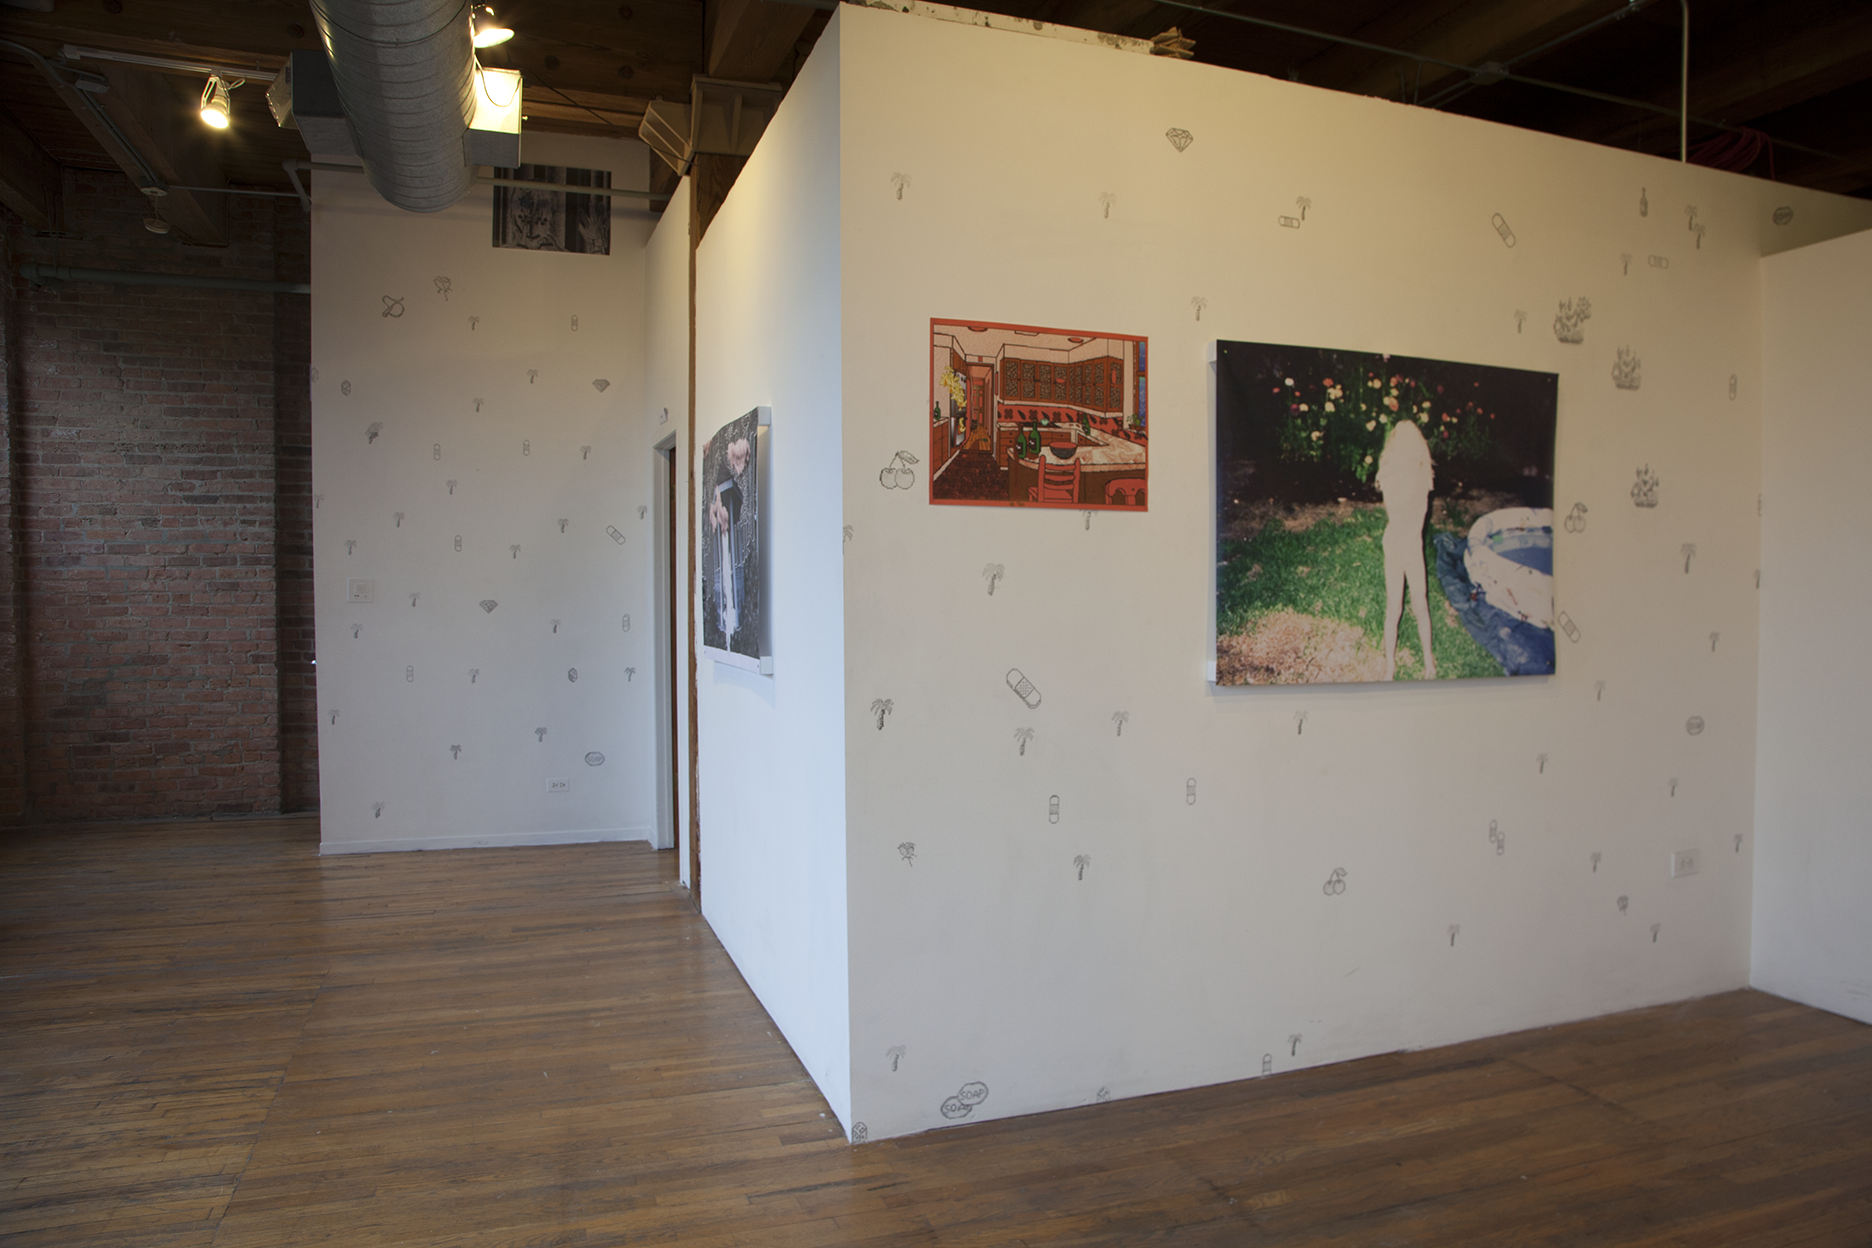 Installation view of three large scale prints hung on white walls with Kidpix graphics drawn in pencil on them